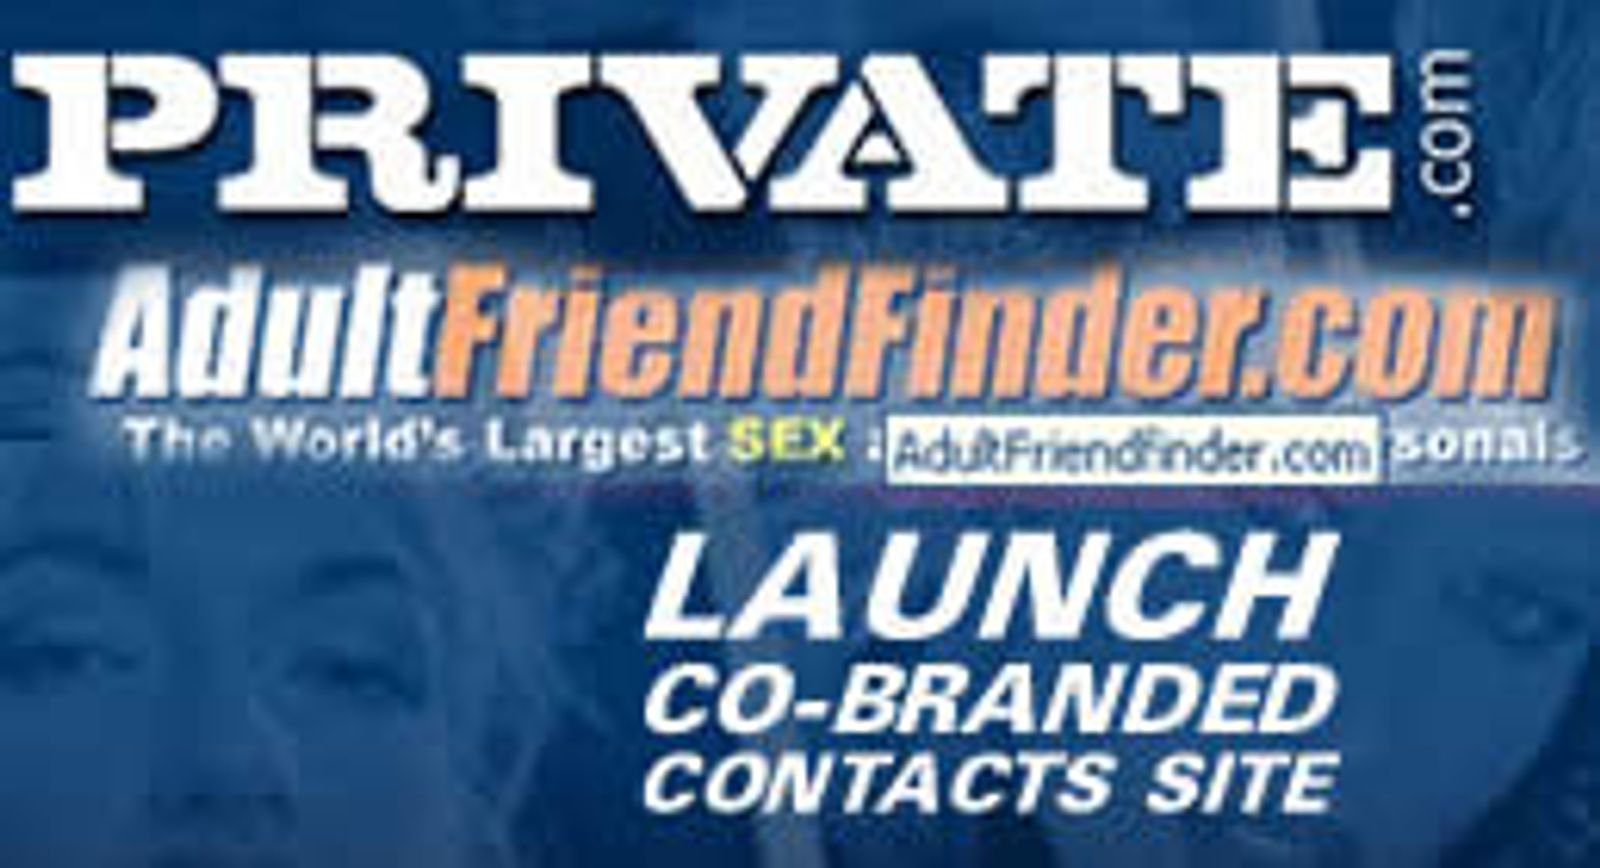 Private Adds Personals To Web Offerings